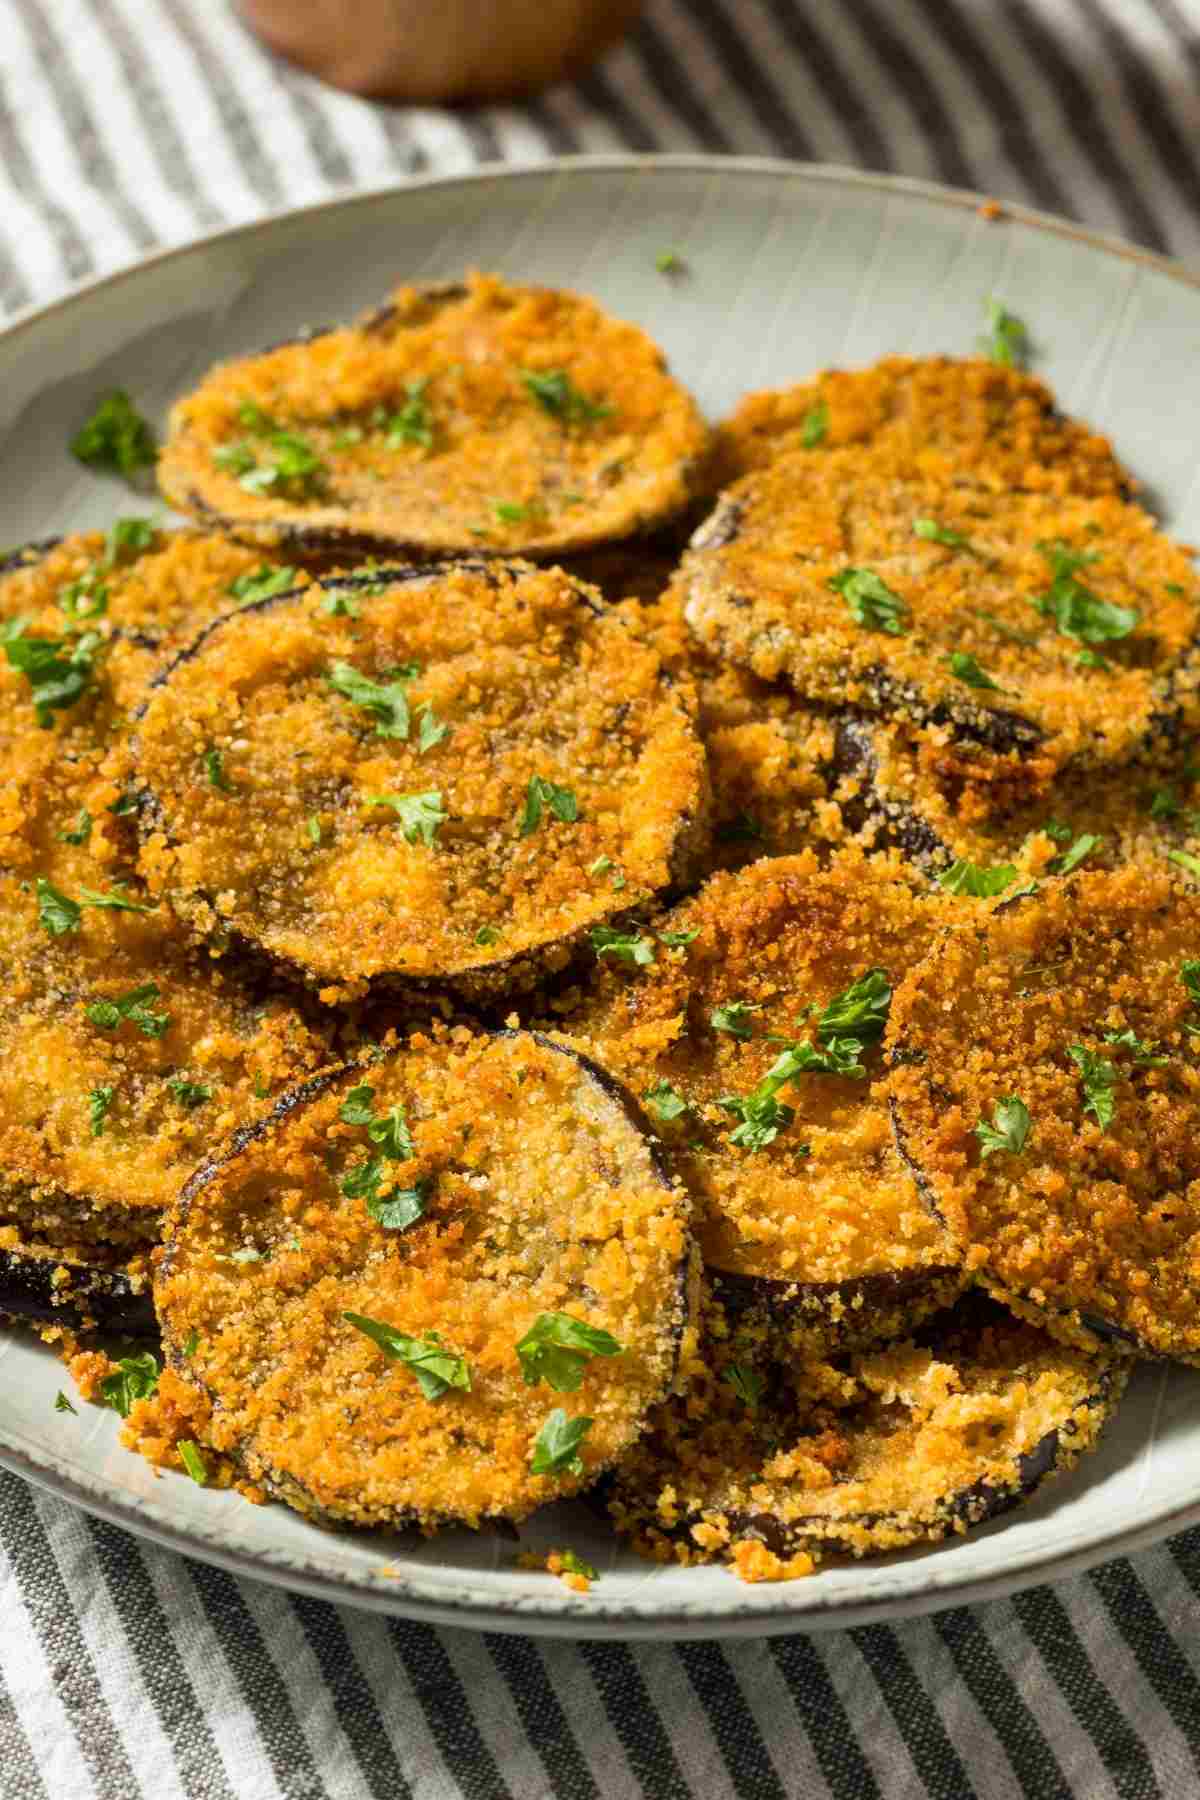 This tasty fried eggplant takes less than 30 minutes to make and is deliciously crisp. If you’re looking for a new side dish, give this recipe a try!